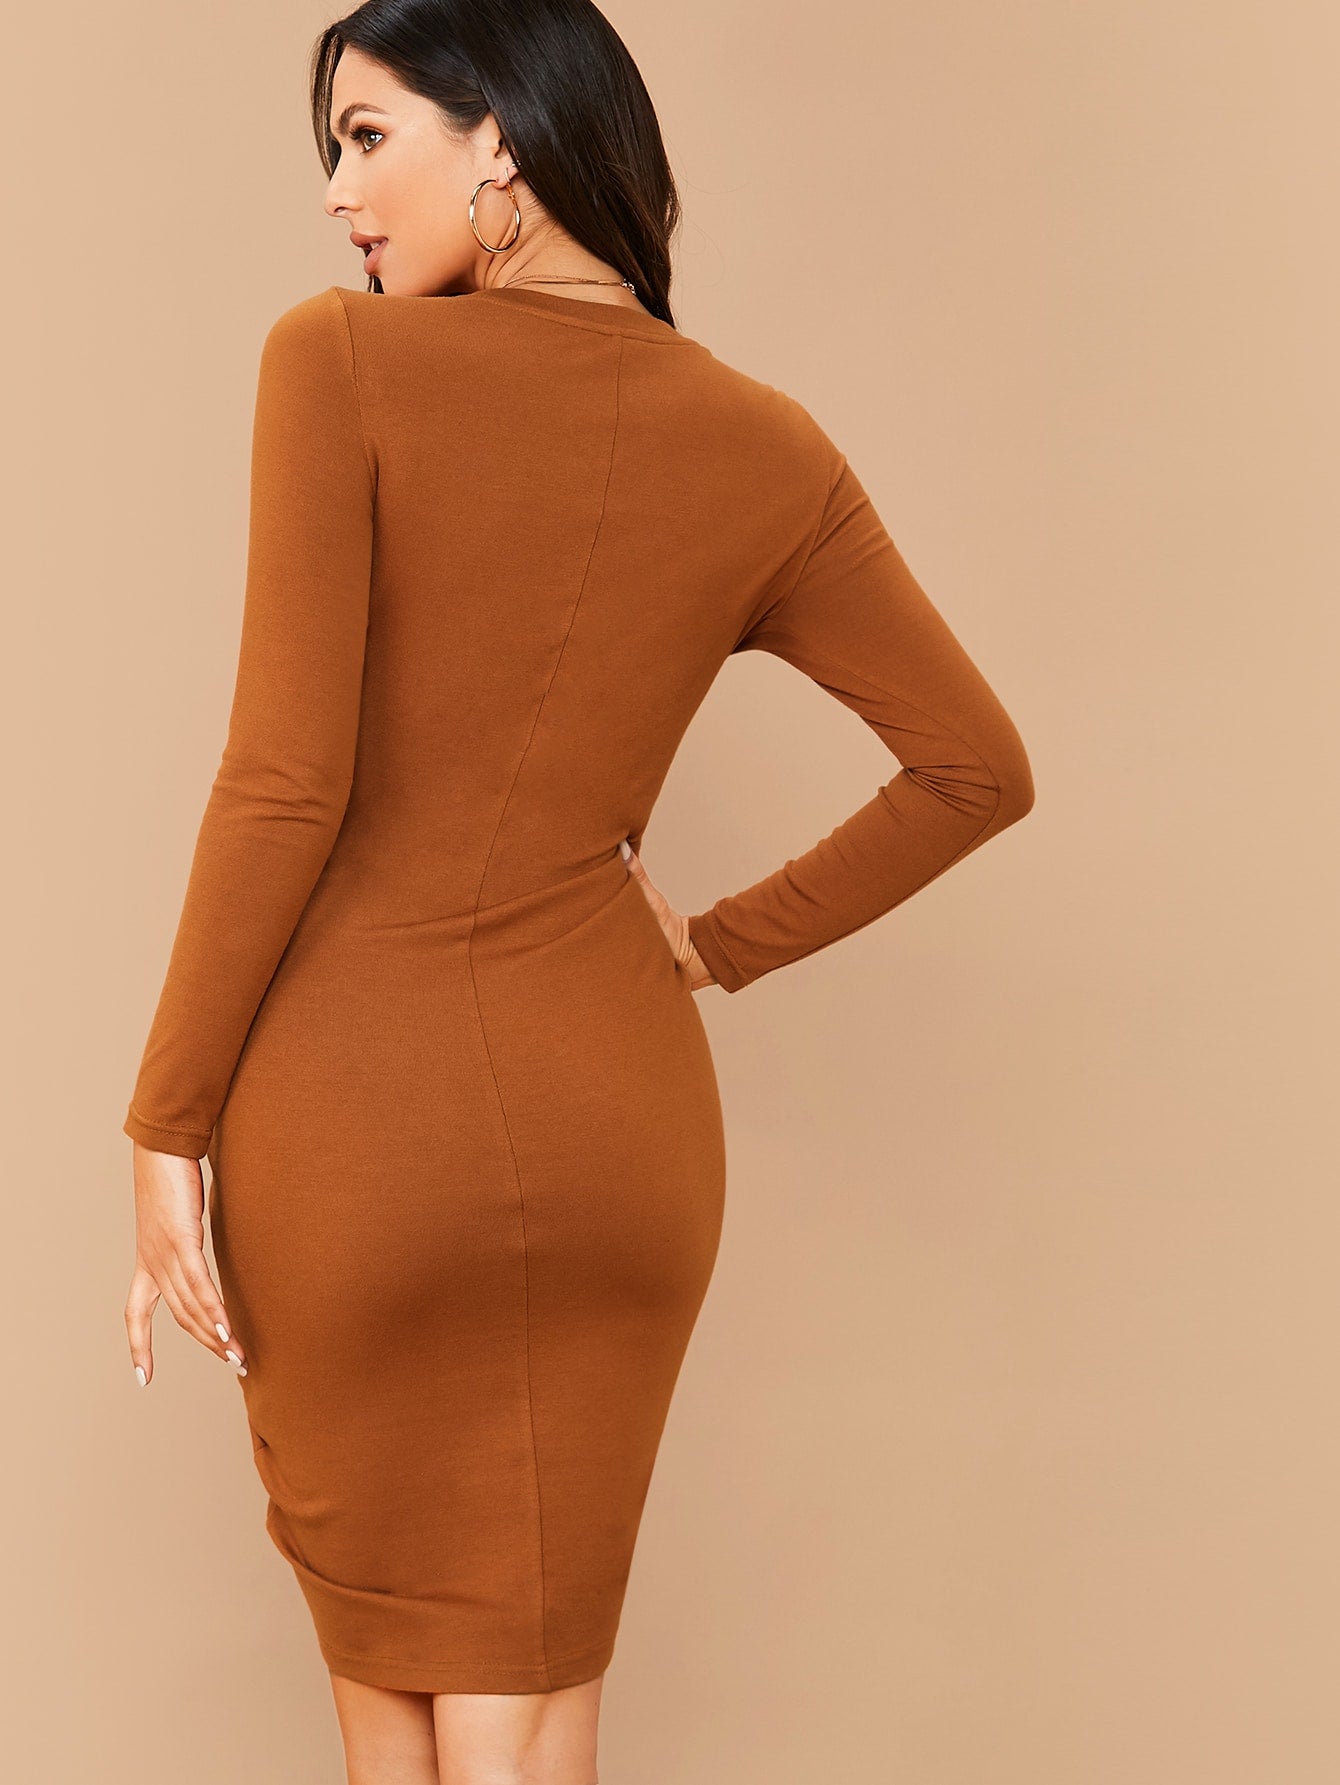 Drawstring Front Solid Bodycon Dress